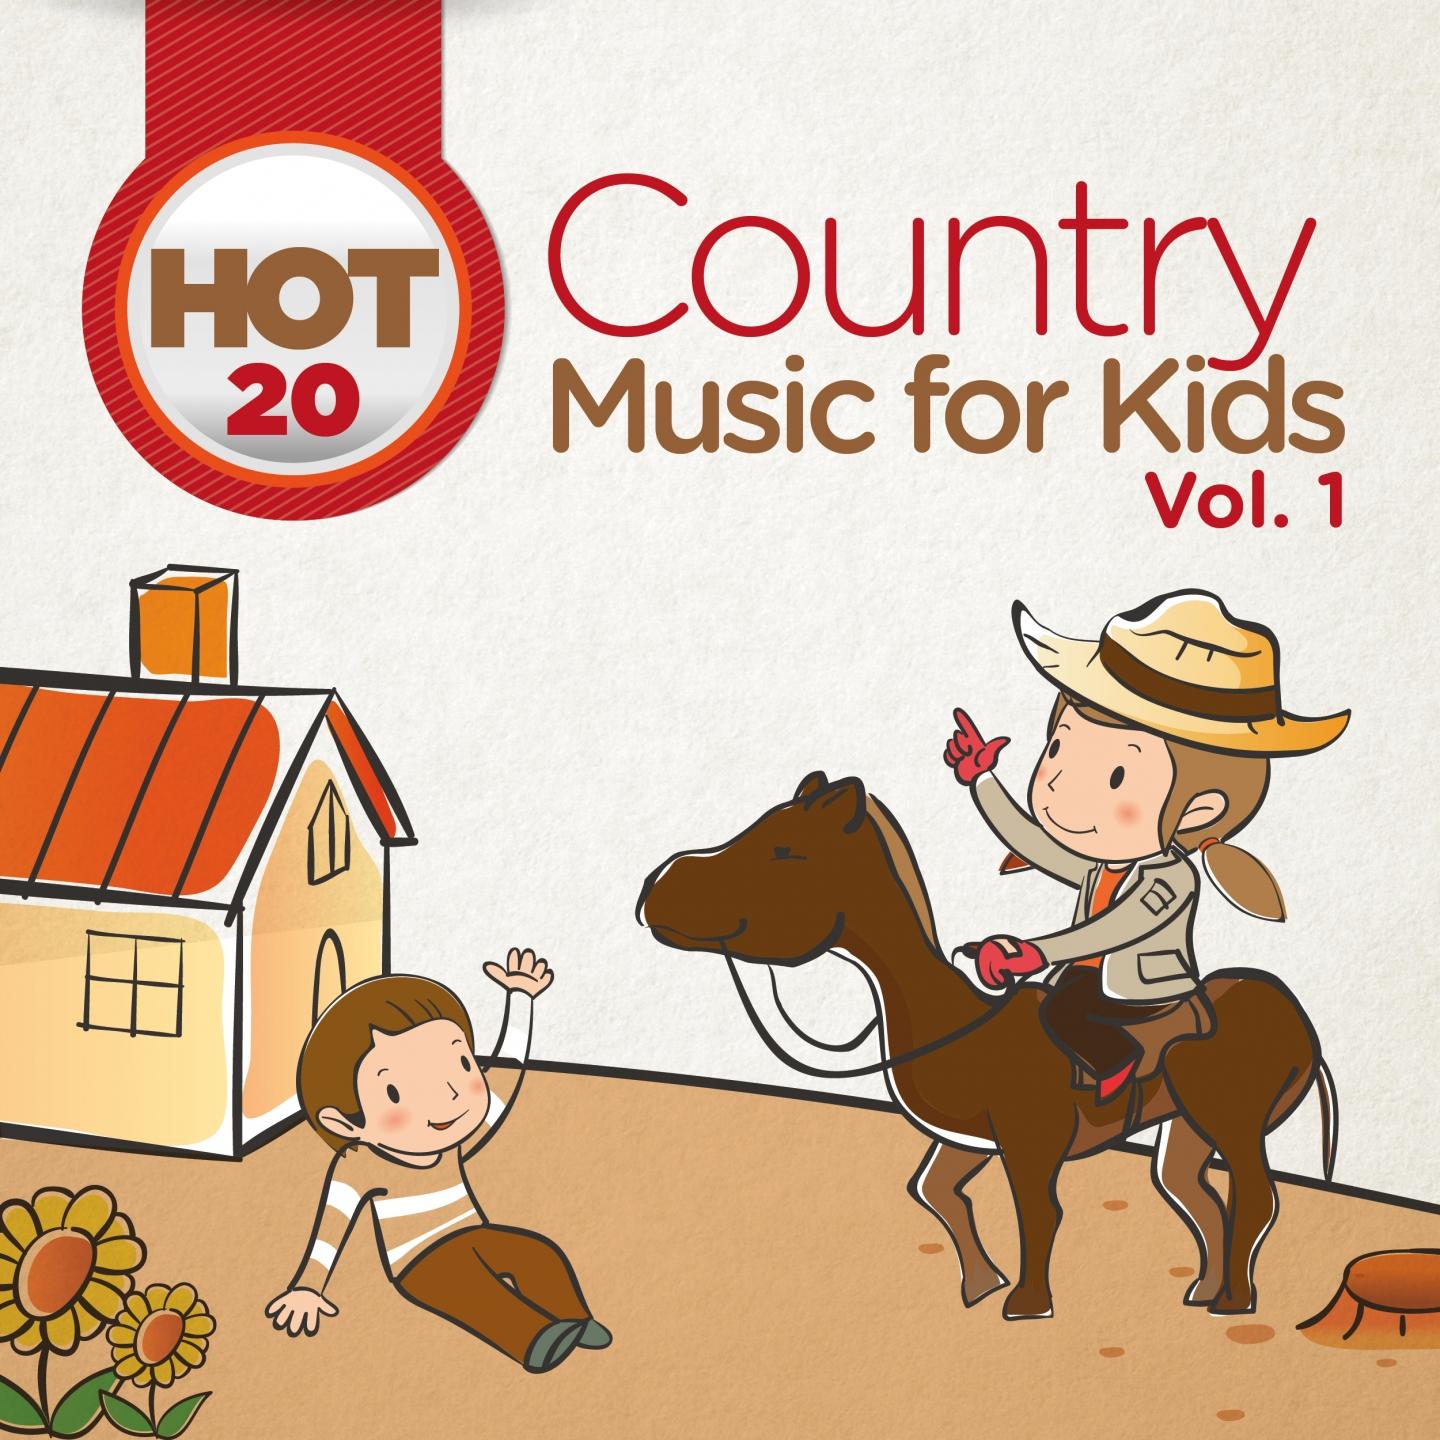 Hot 20: Country Music for Kids, Vol. 1